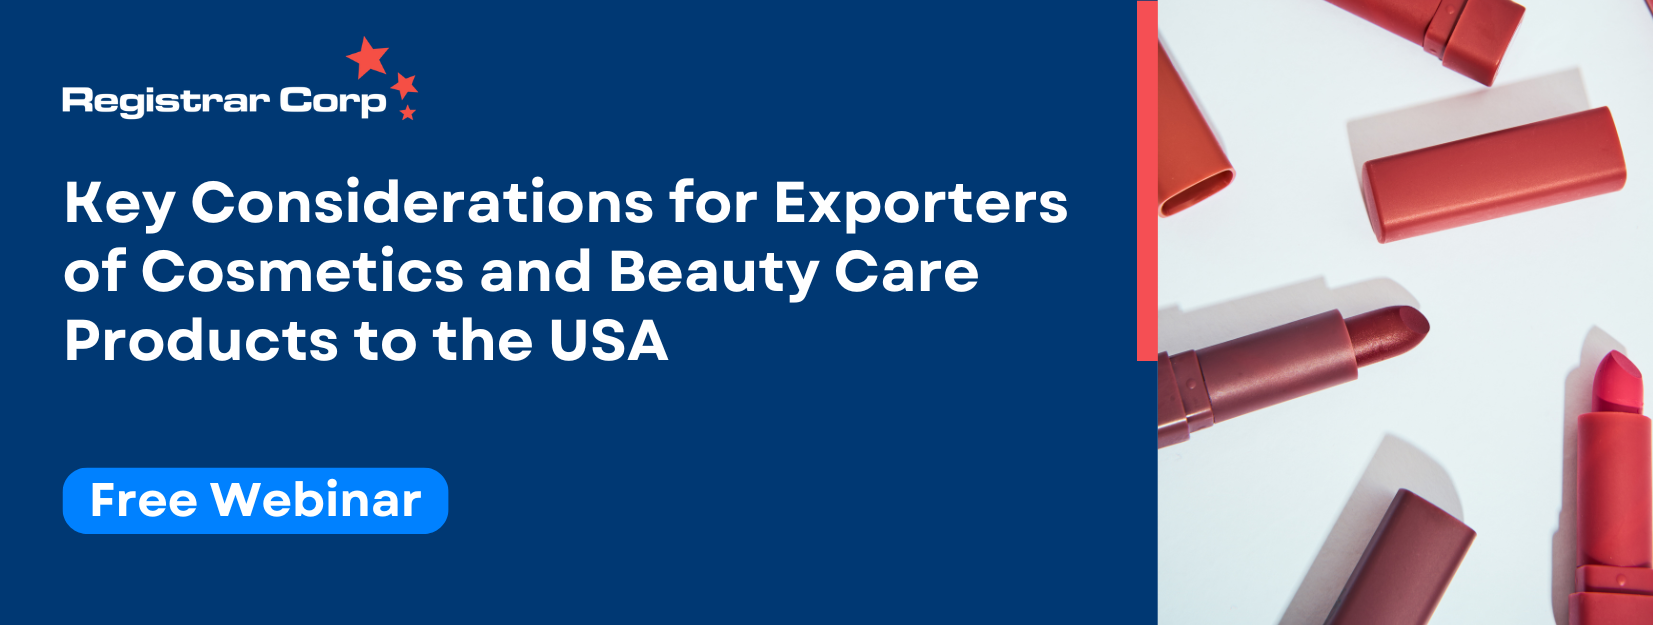 Key Considerations for Exporters of Cosmetics and Beauty Care Products to the USA